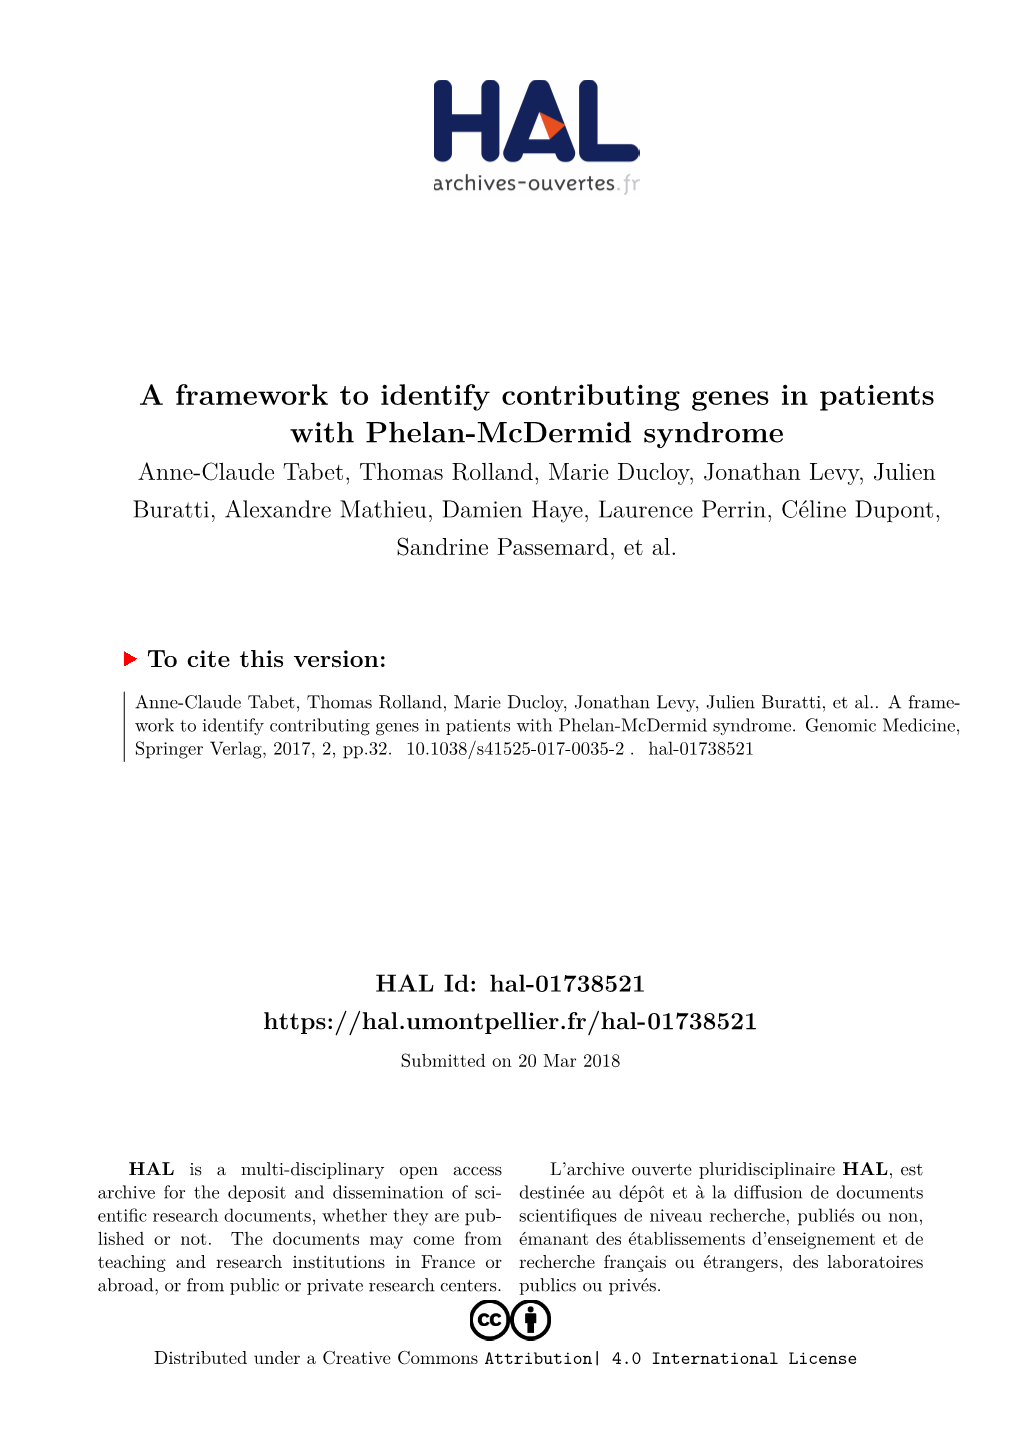 A Framework to Identify Contributing Genes in Patients with Phelan